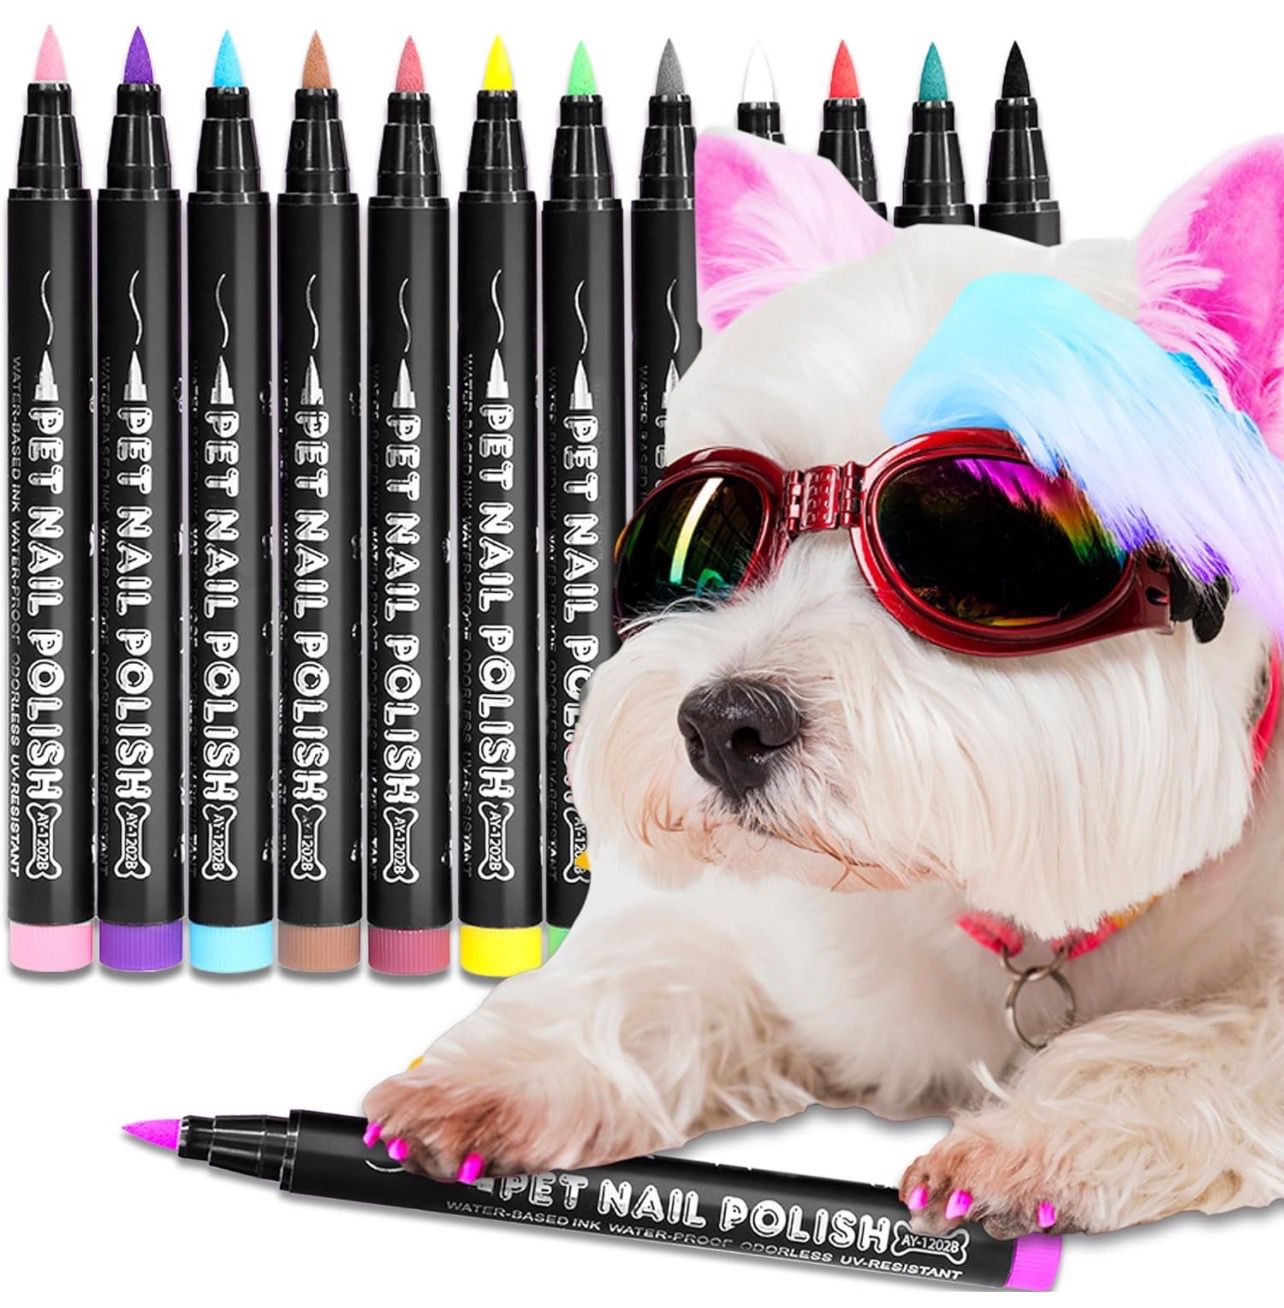 CNWHMY Quick Dry Dog Nail Polish Pens 12 Colors,Pet Safe and Non-Toxic Nail Polish Easy Application for Dogs, Cats, and Small Pets Nail Accessories